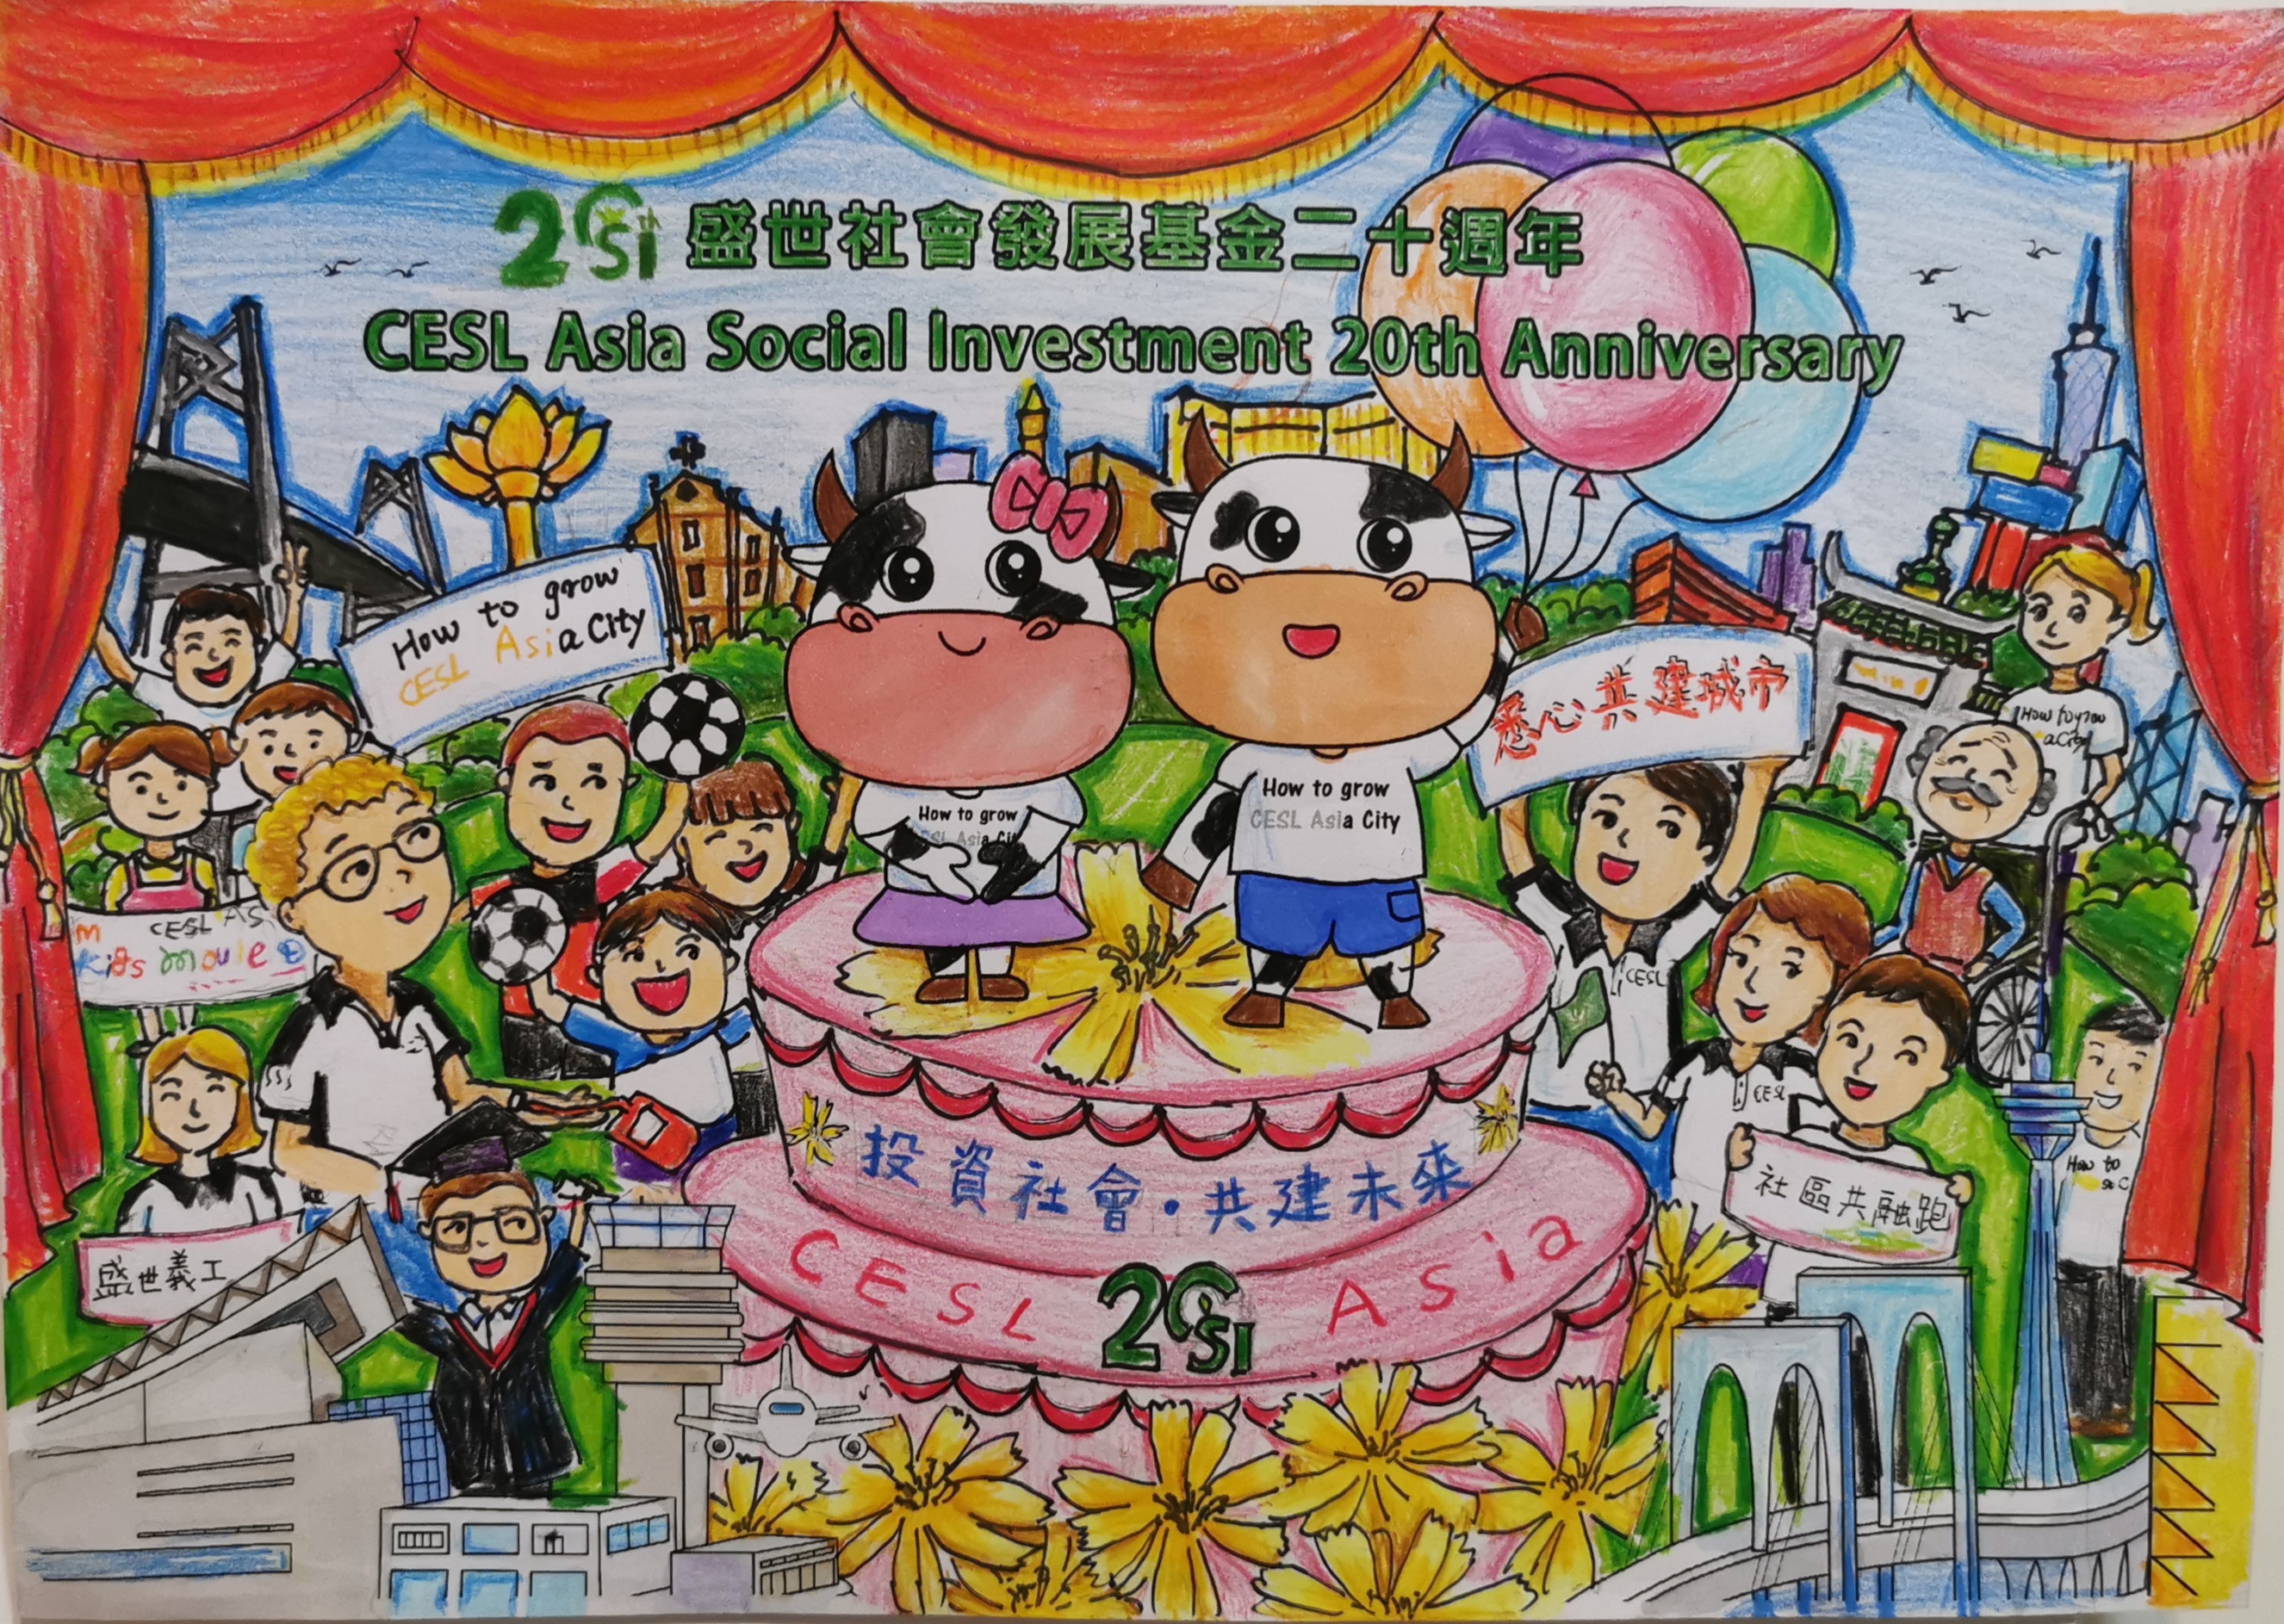 "CESL Asia Social Investment 20th Anniversary" Kid's Drawing Contest